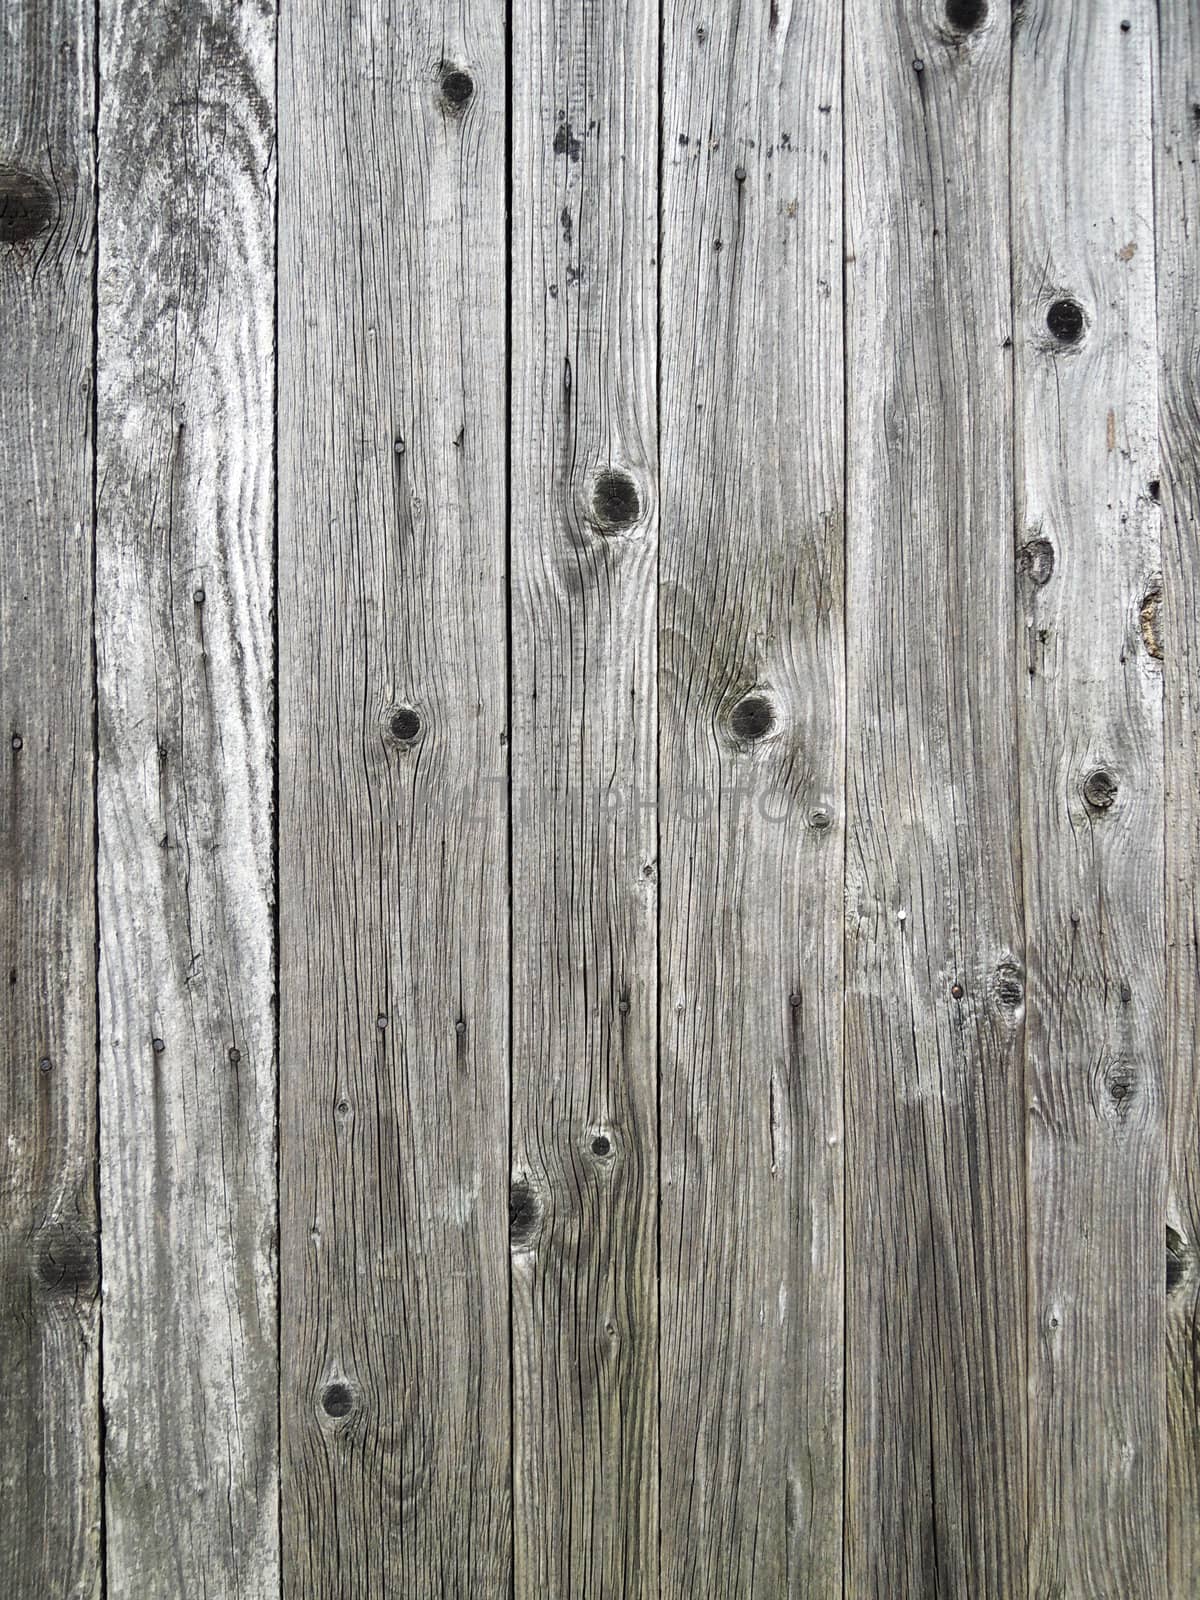 Gray wooden wall background